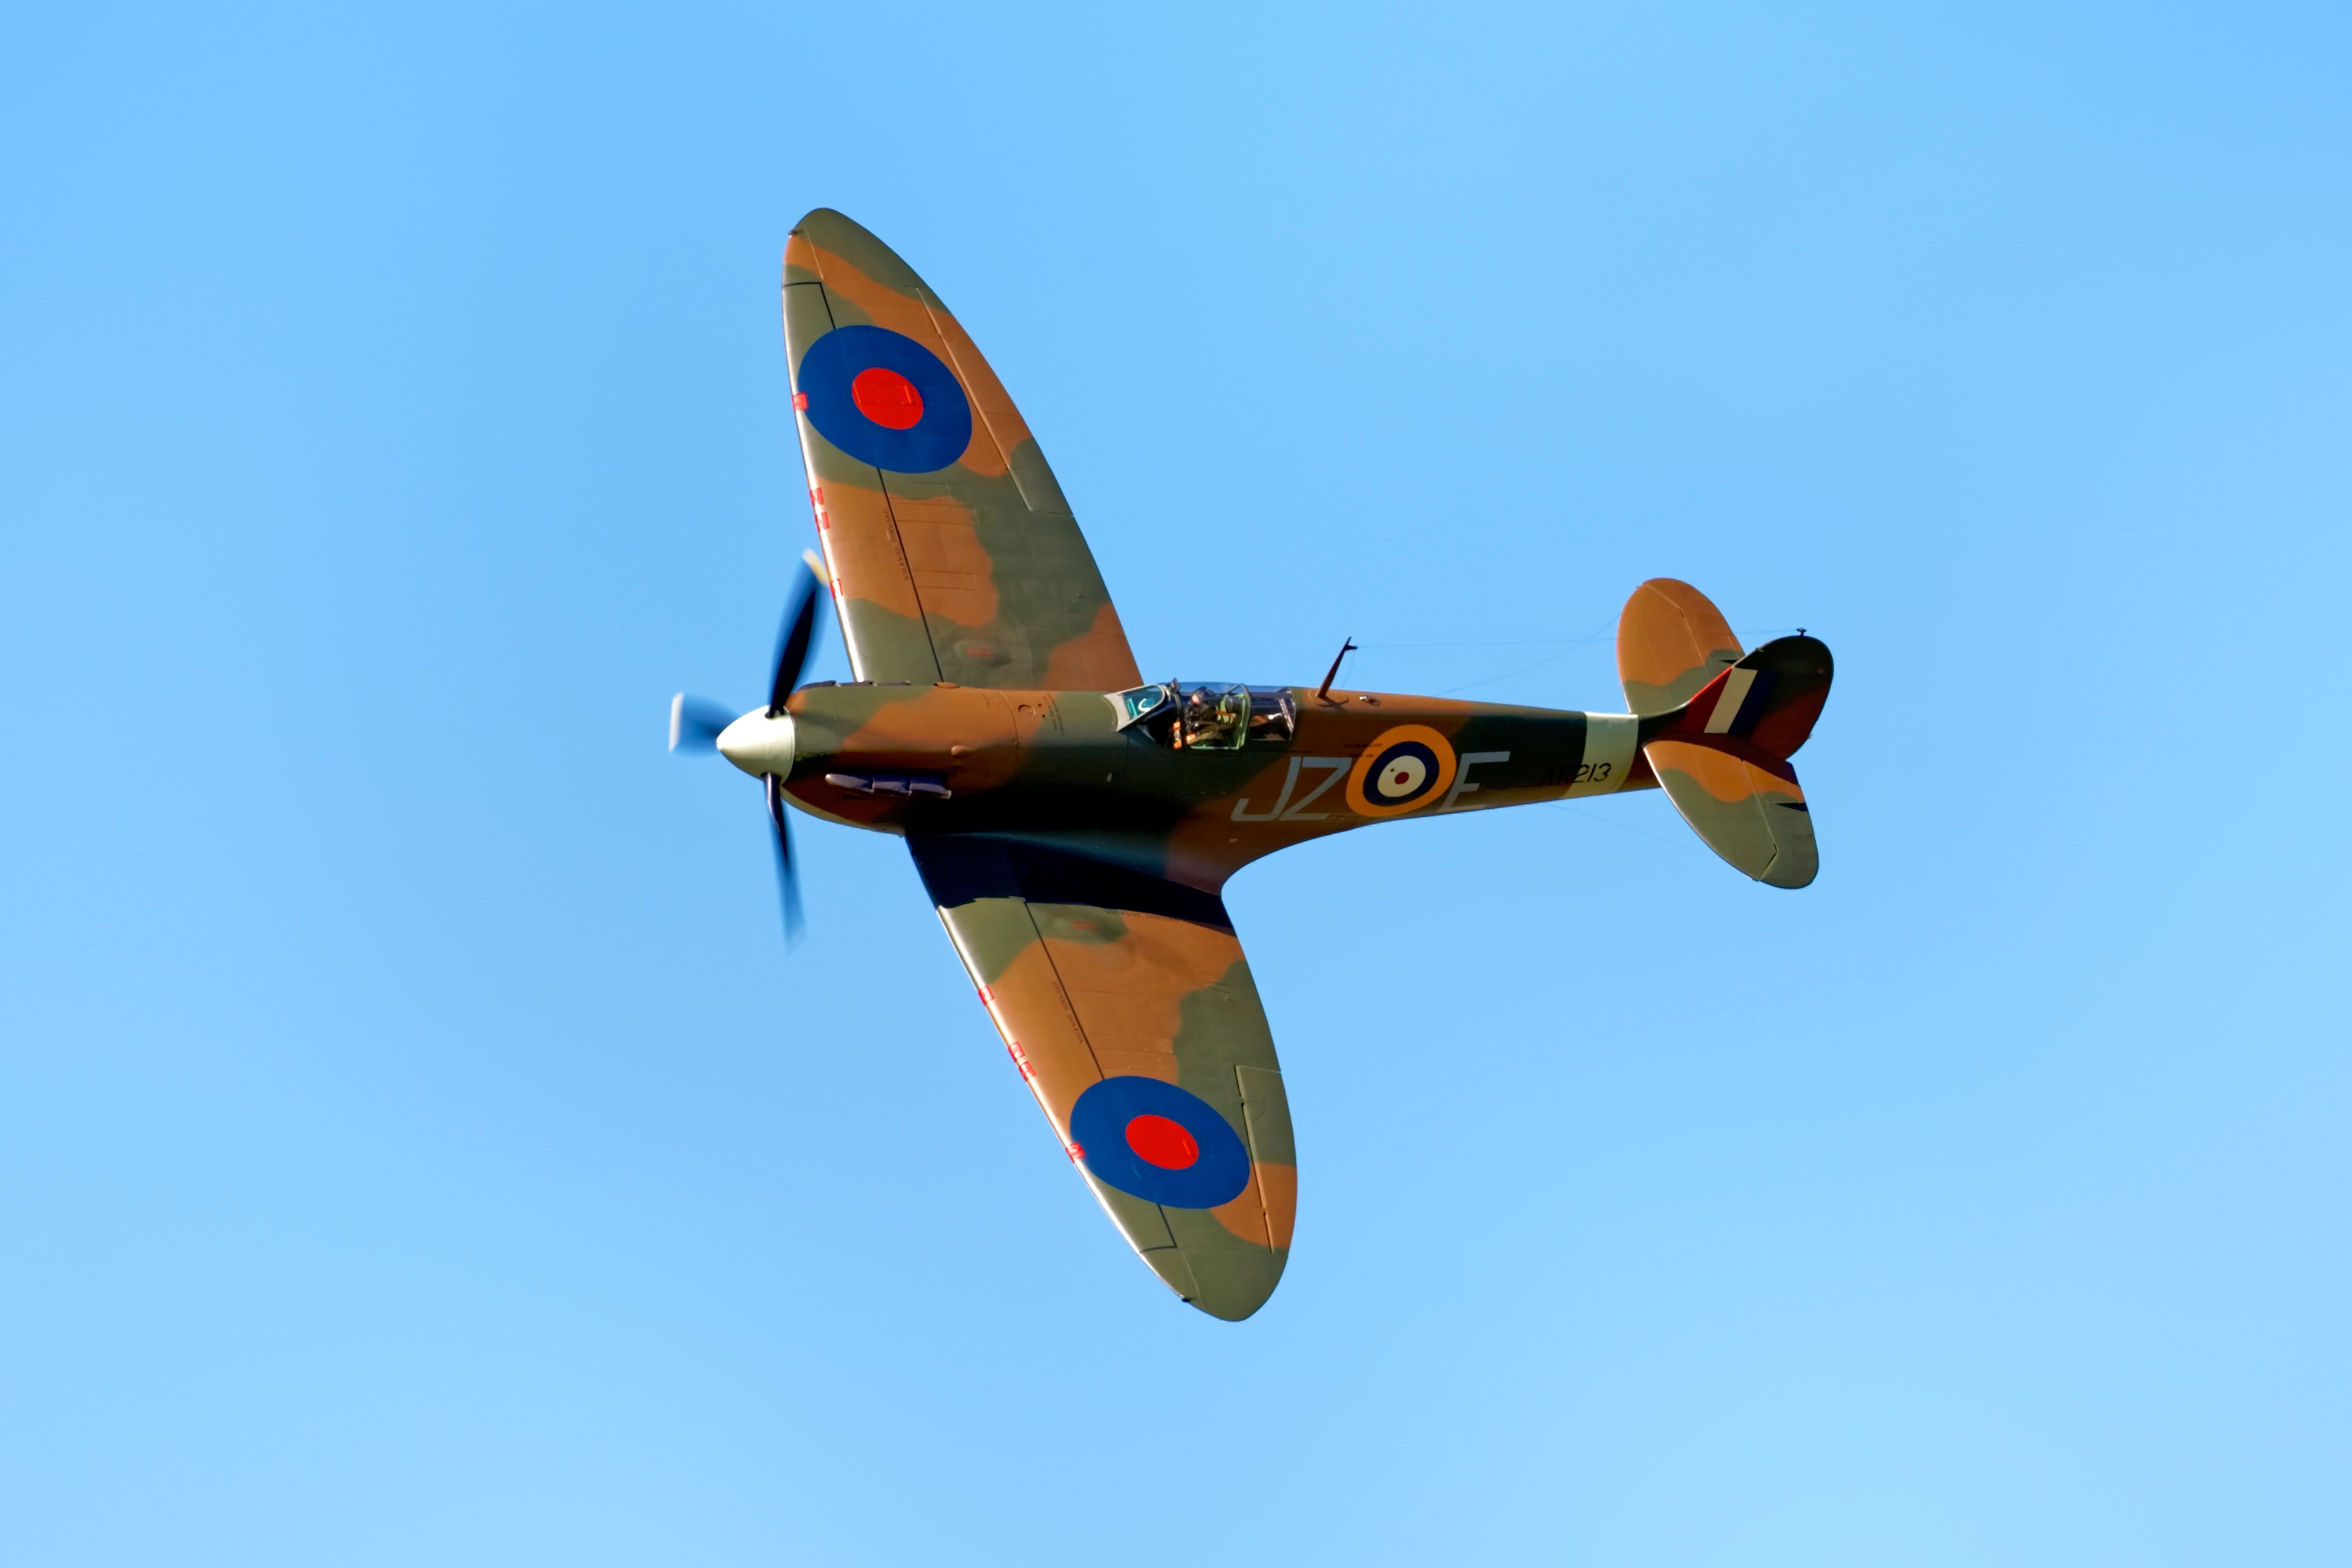 A Supermarine Spitfire flying in the sky.